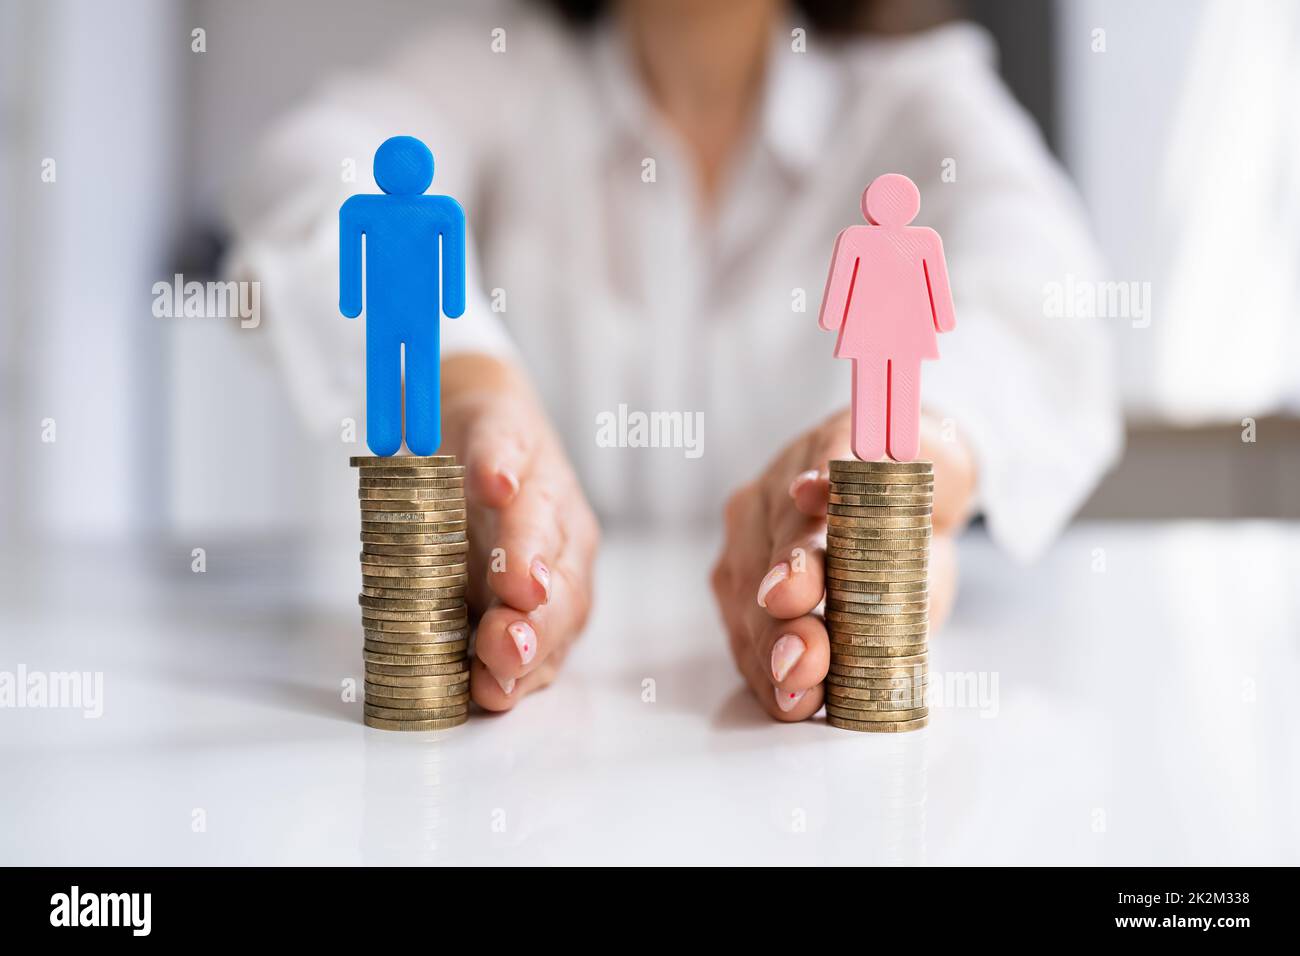 Equal Money And Finance Separation Stock Photo